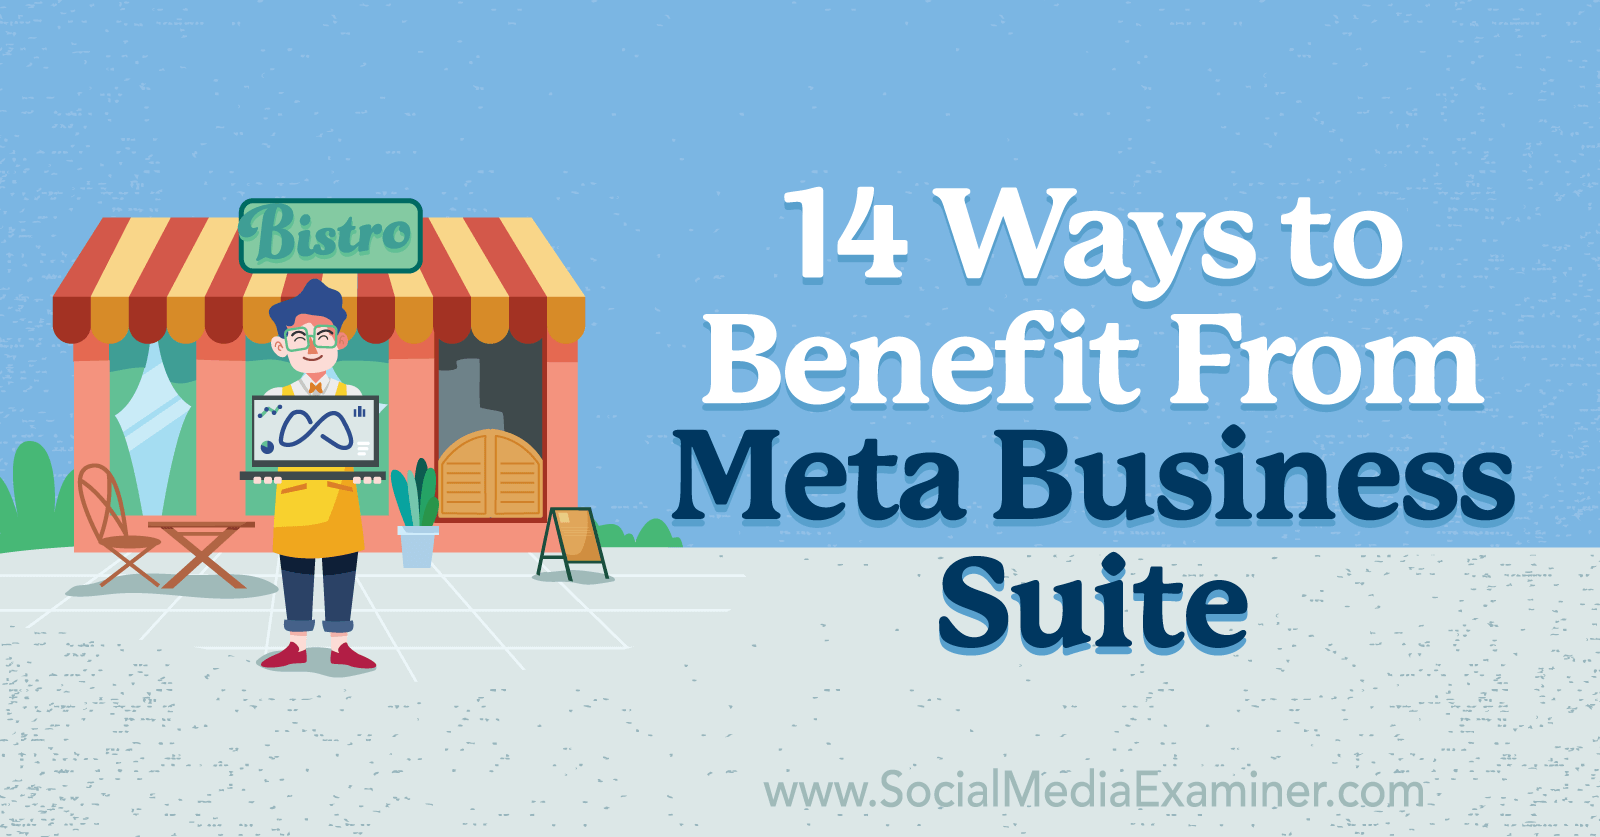 14 Ways to Benefit From Meta Business Suite by Anna Sonnenberg on Social Media Examiner.